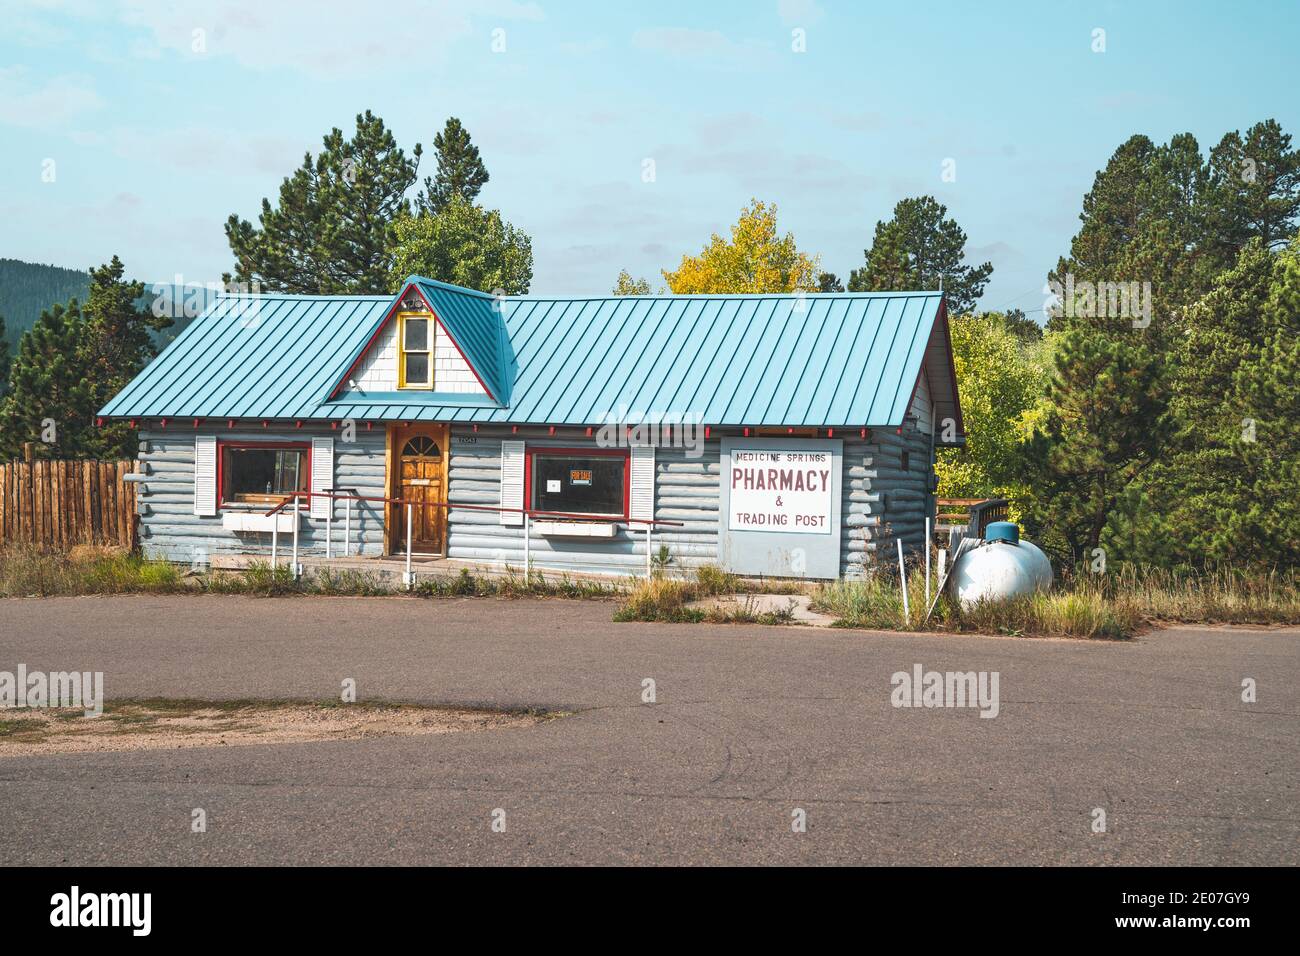 Black Hawk, Colorado - September 18, 2020: Exterior view of the Medincine Spings Pharmacy and Trading Post, now closed Stock Photo